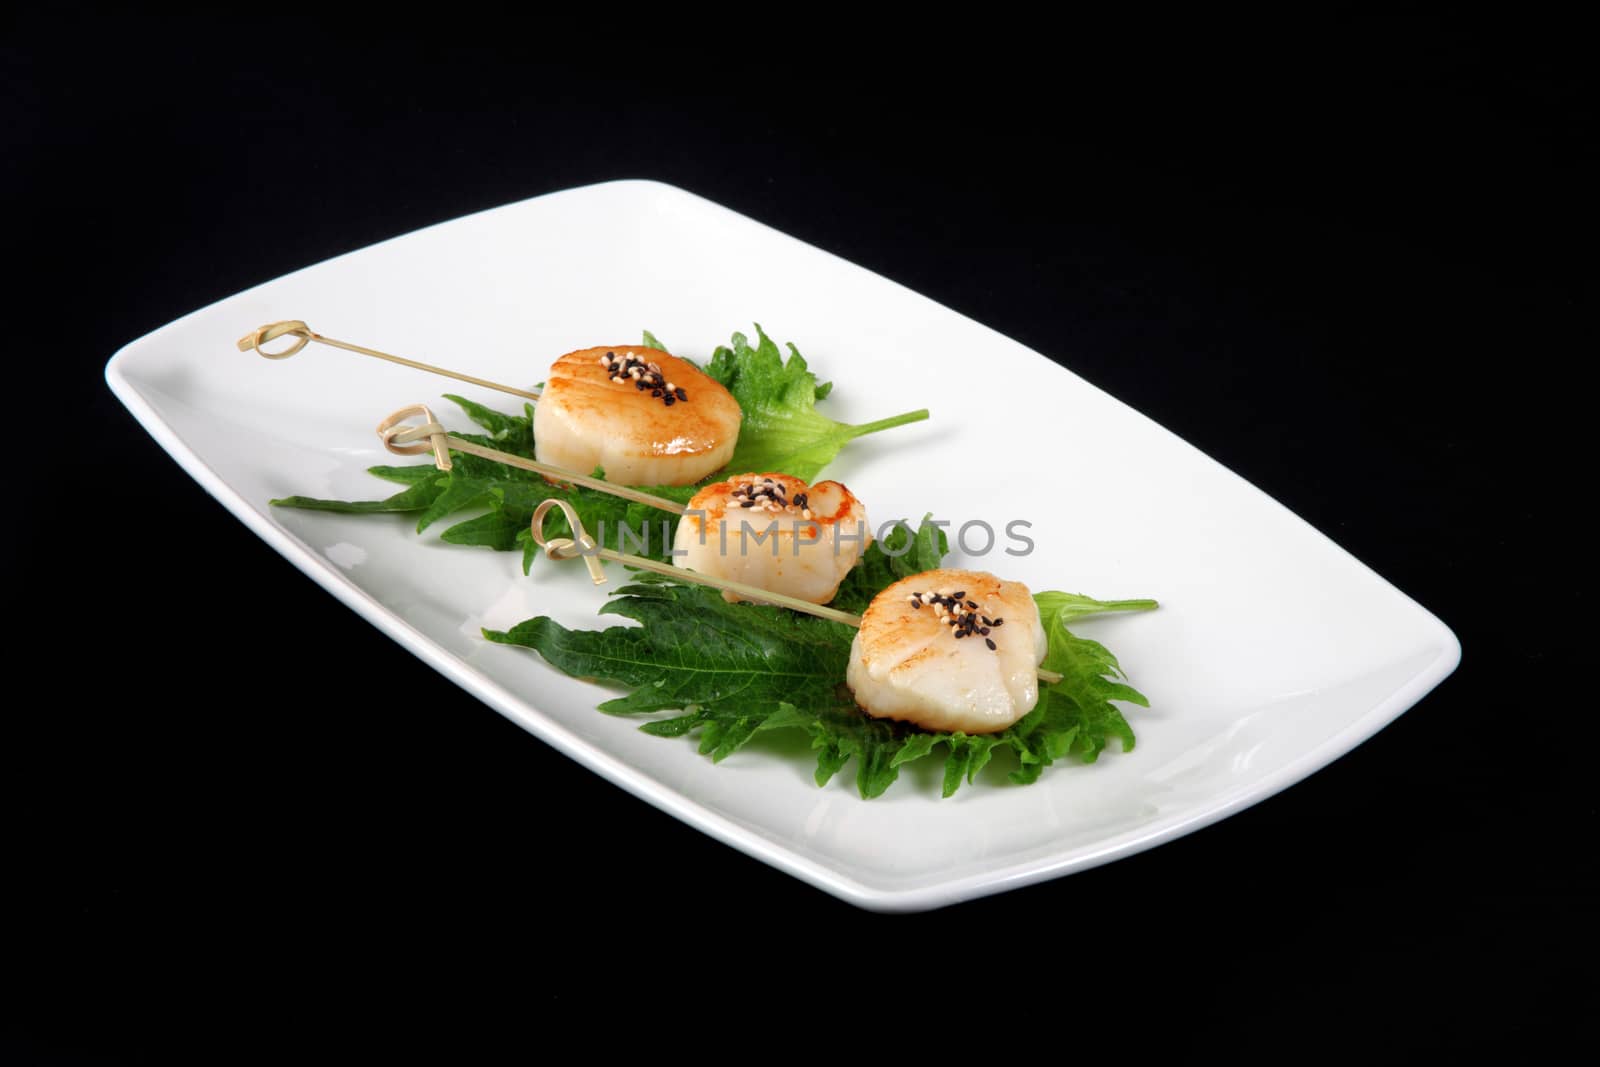 grilled scallops with vegetables on square plate on a black background